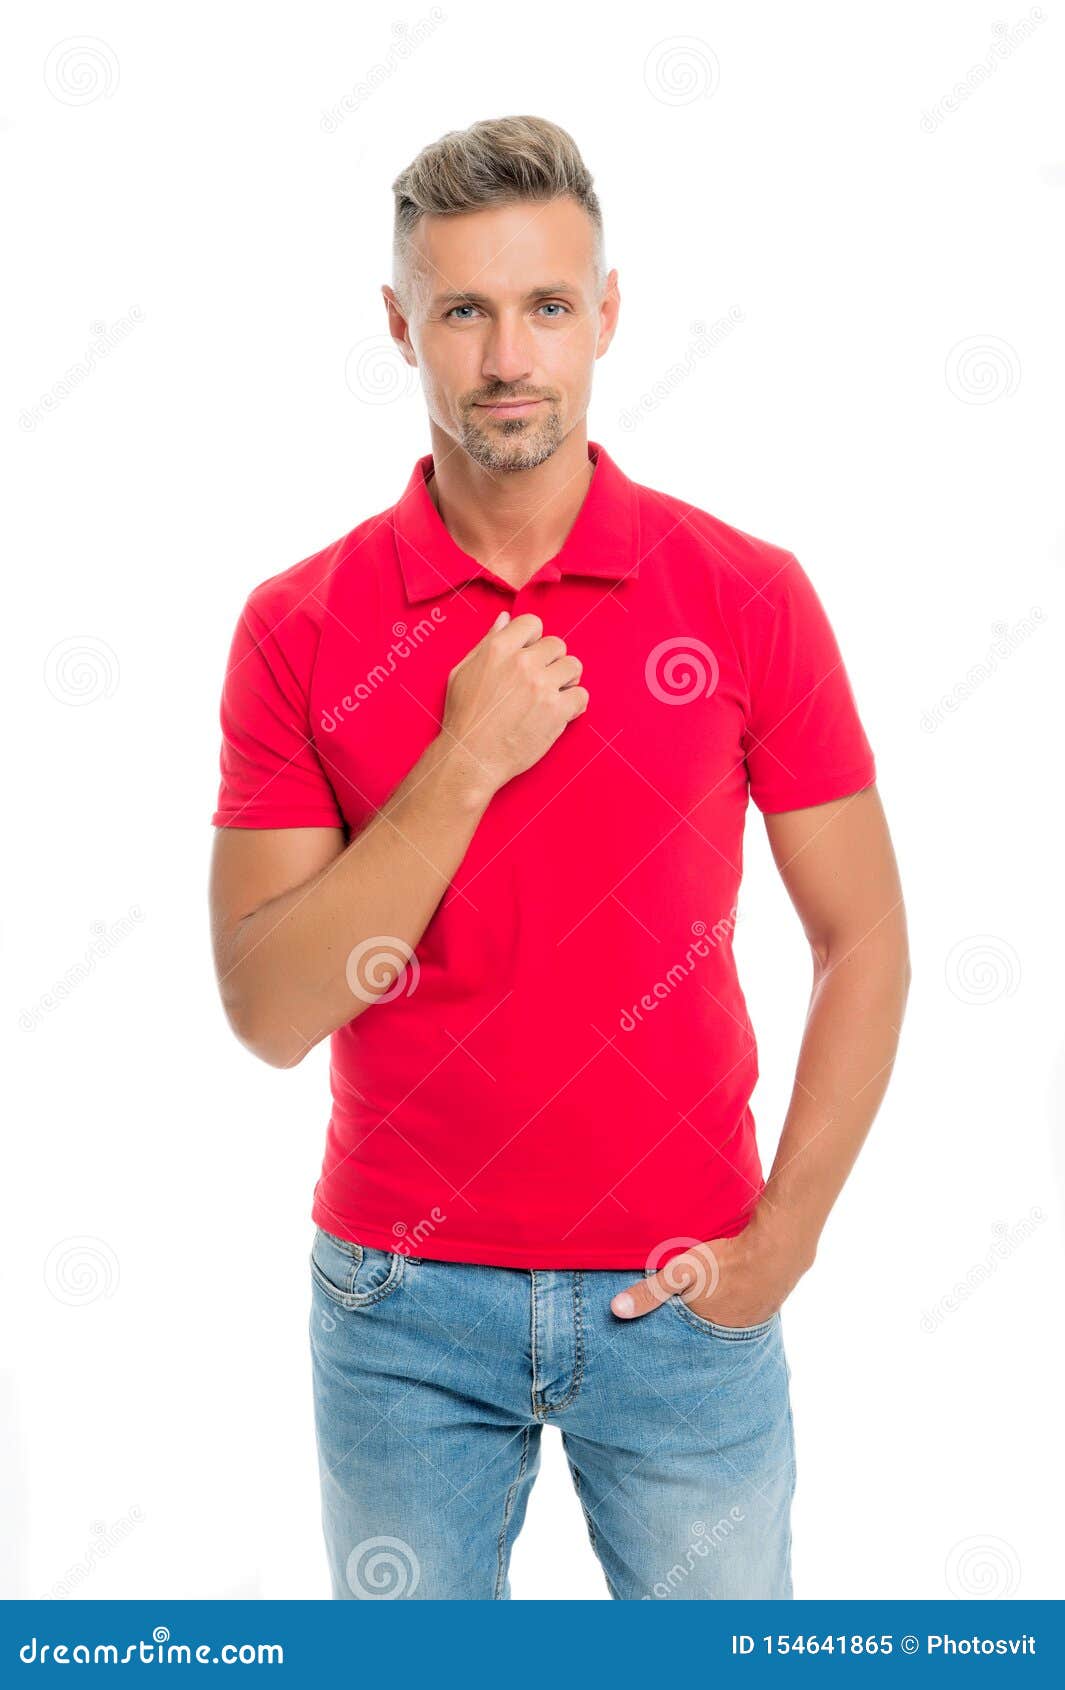 Red shirt with pants what wear to What to